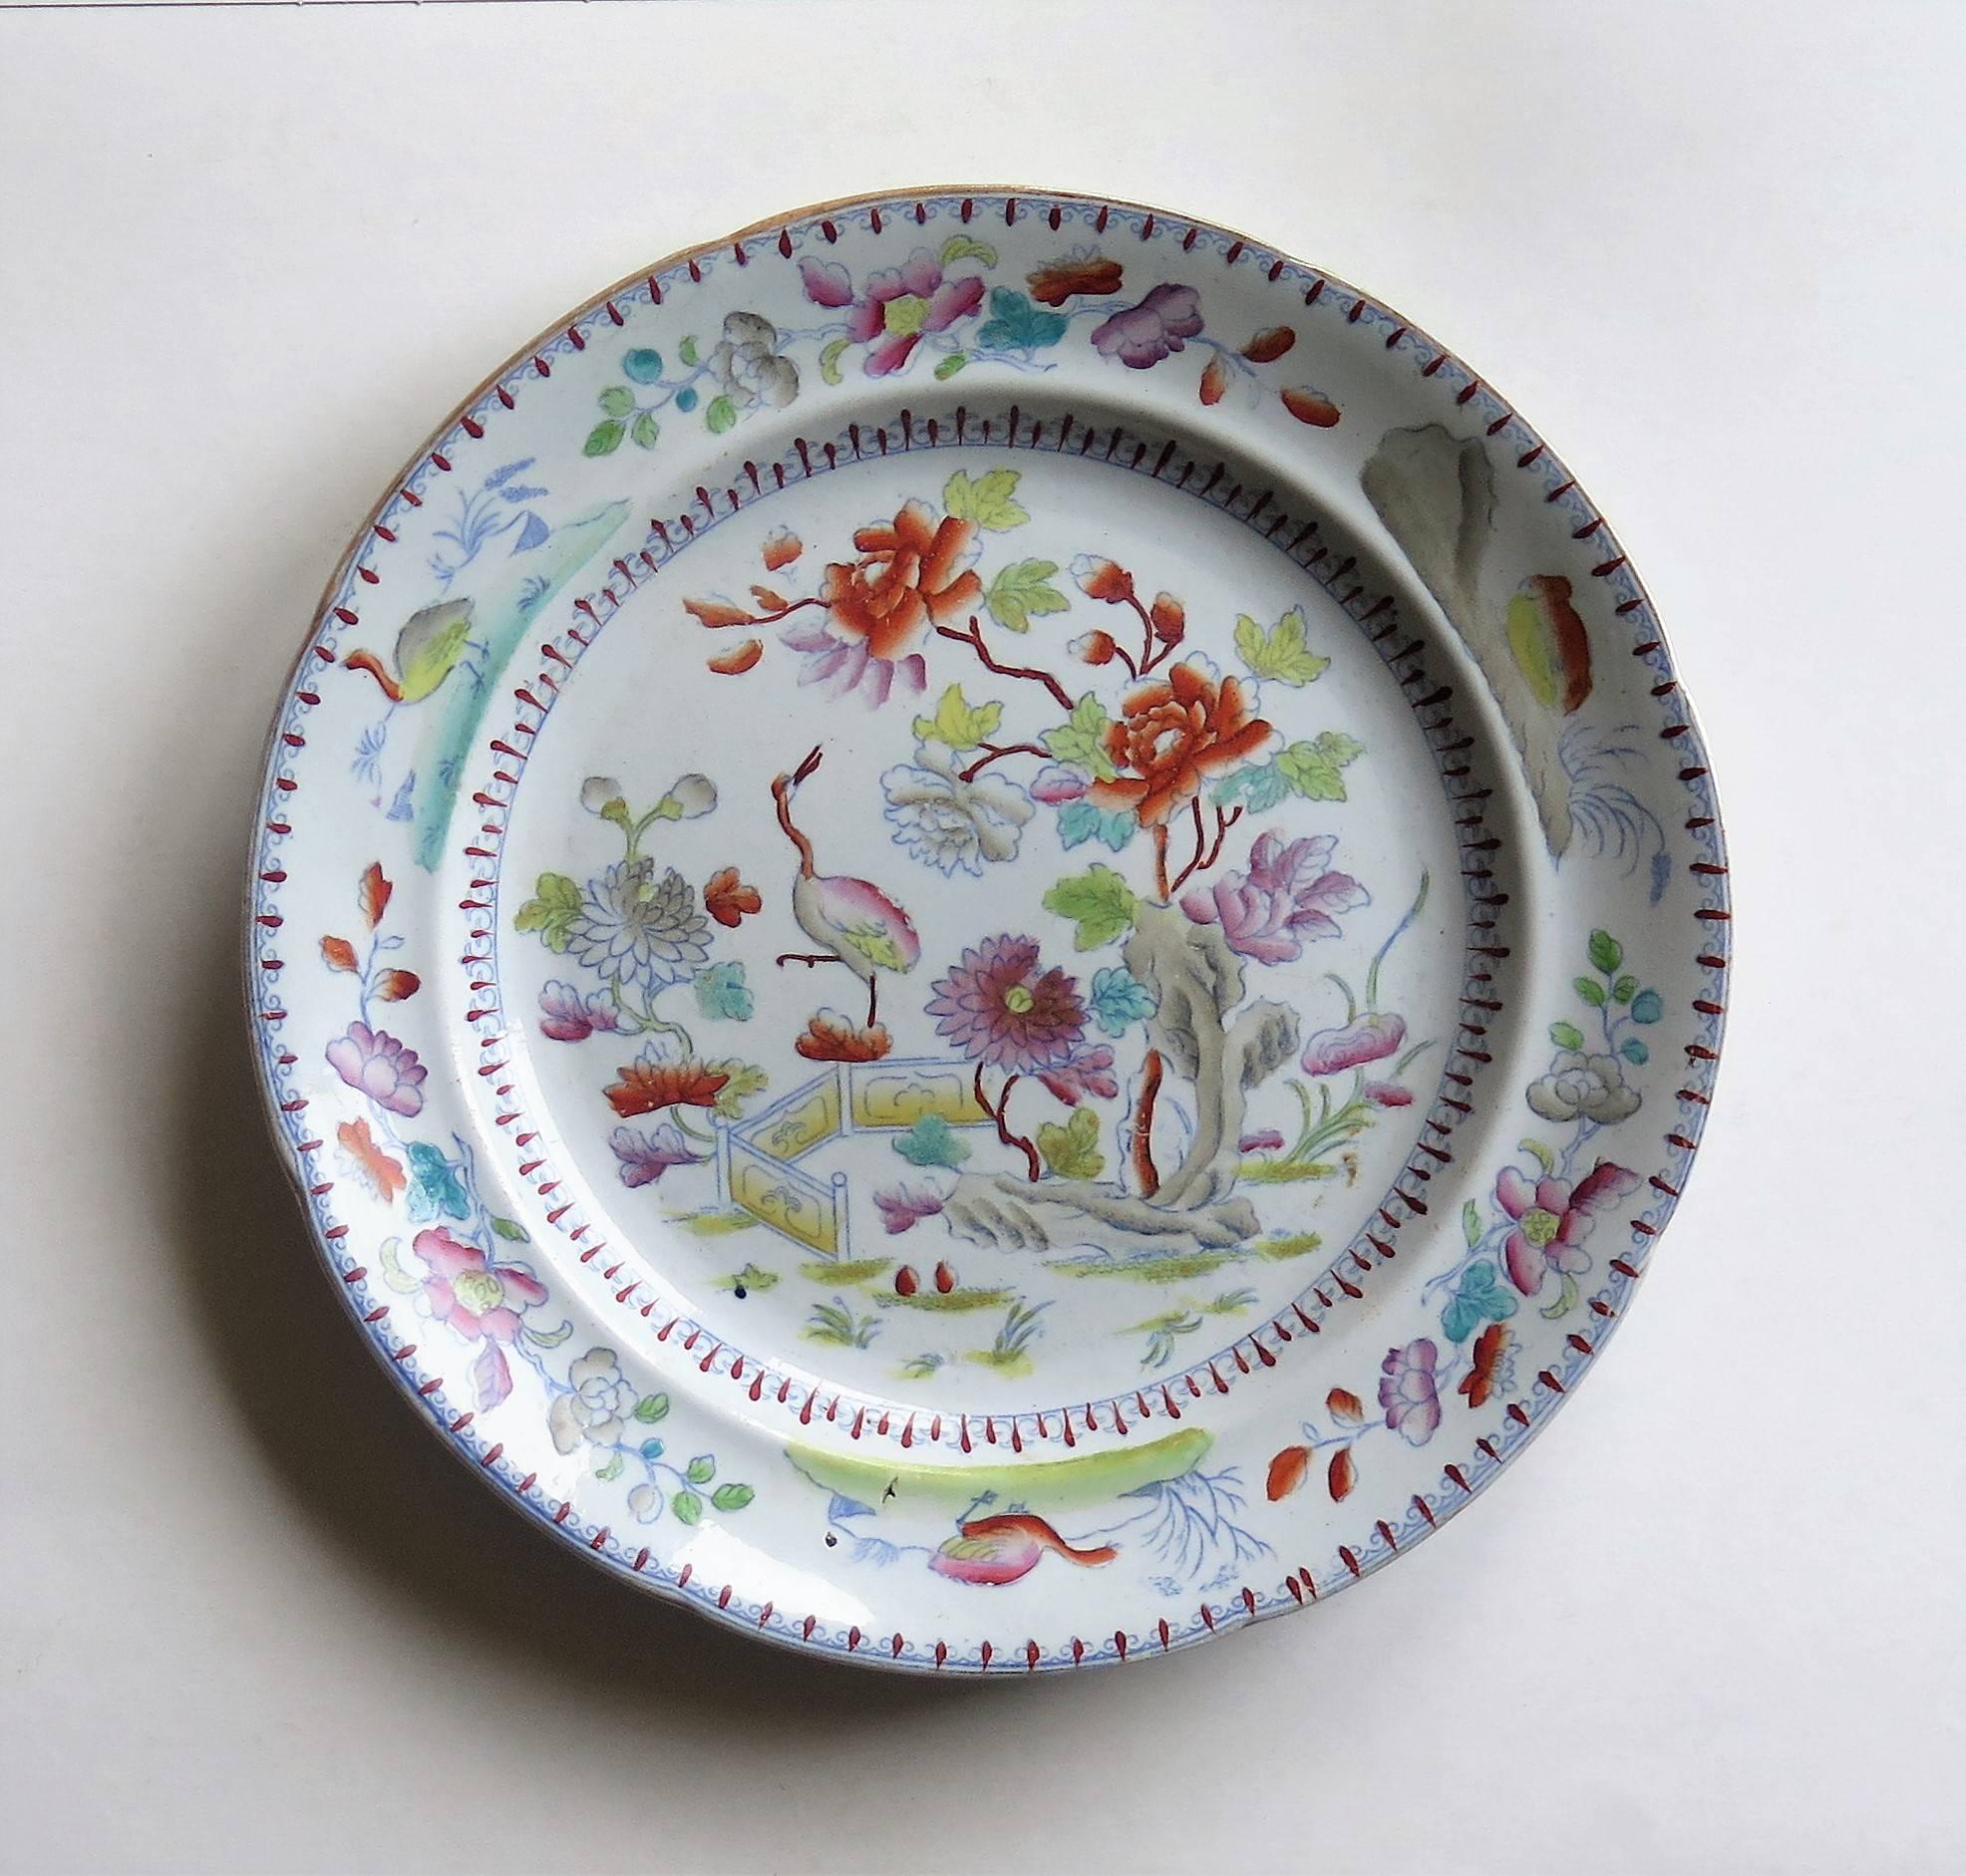 This a very good dinner plate made by William Davenport & Co., Longport, Staffordshire Potteries, England, circa 1810.

The plate is carefully hand-painted over a printed outline in a bold Imari, Japan pattern No. 27. The design highlights a Crane